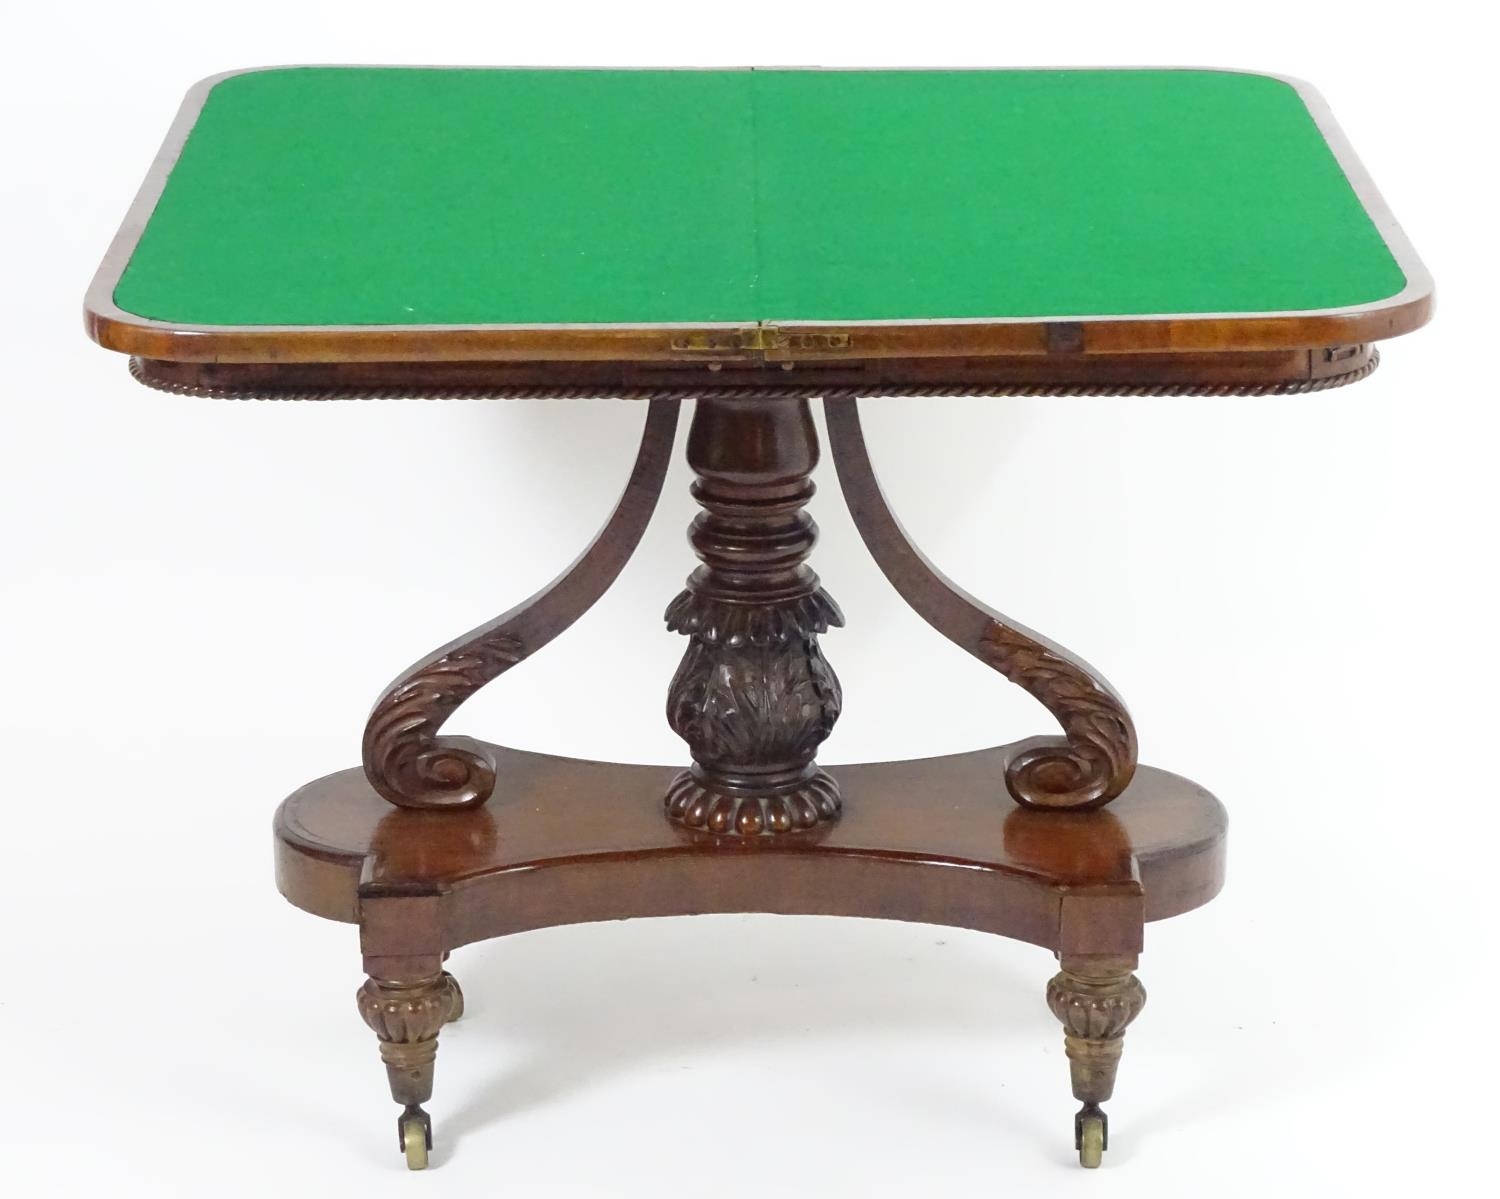 An early / mid 19thc Scottish platform card table with a mahogany and rosewood crossbanded top, - Image 10 of 10